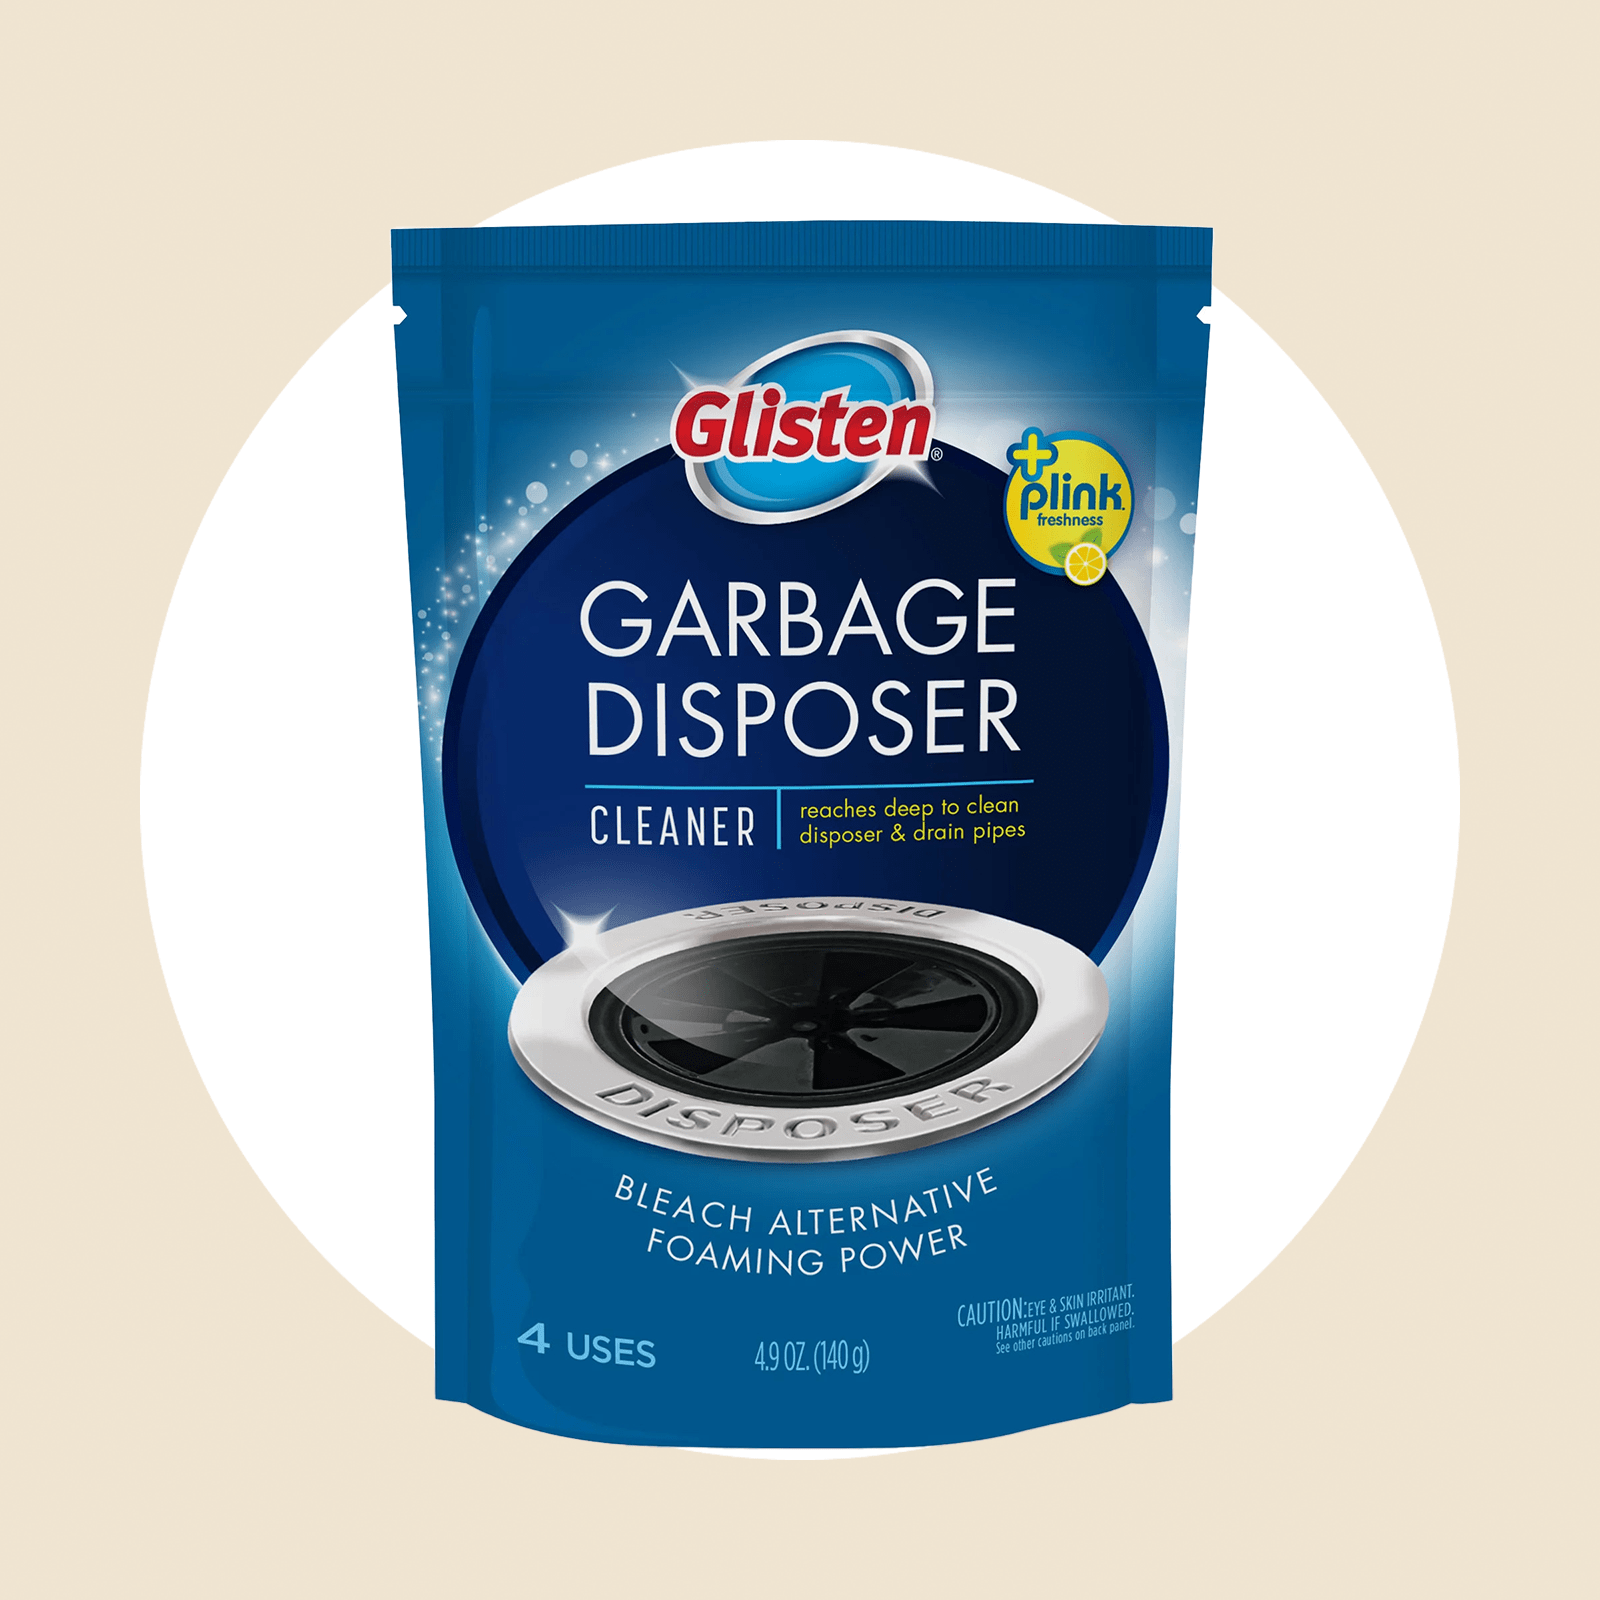 How to Clean a Garbage Disposal — Get Rid of Garbage Disposal Smells